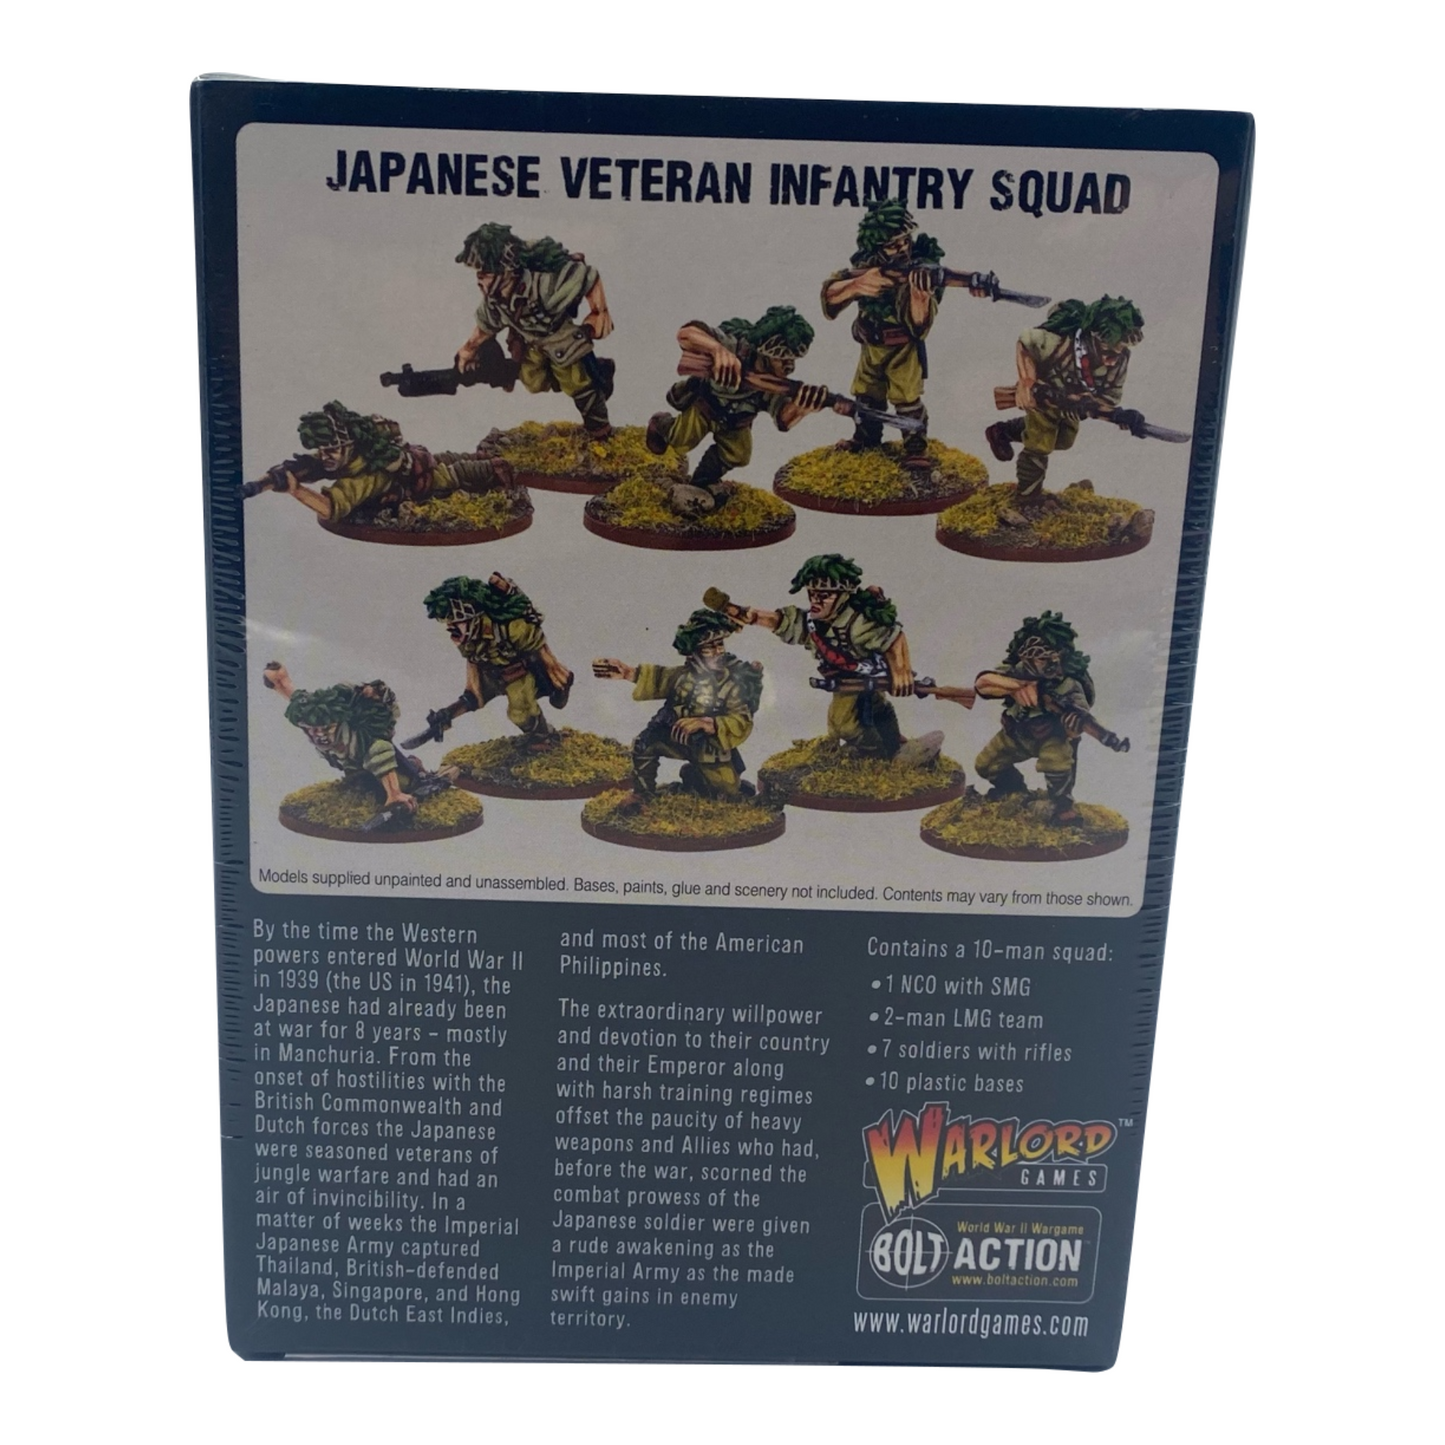 Bolt Action - Imperial Japanese Army Veteran Infantry Squad - 402216003